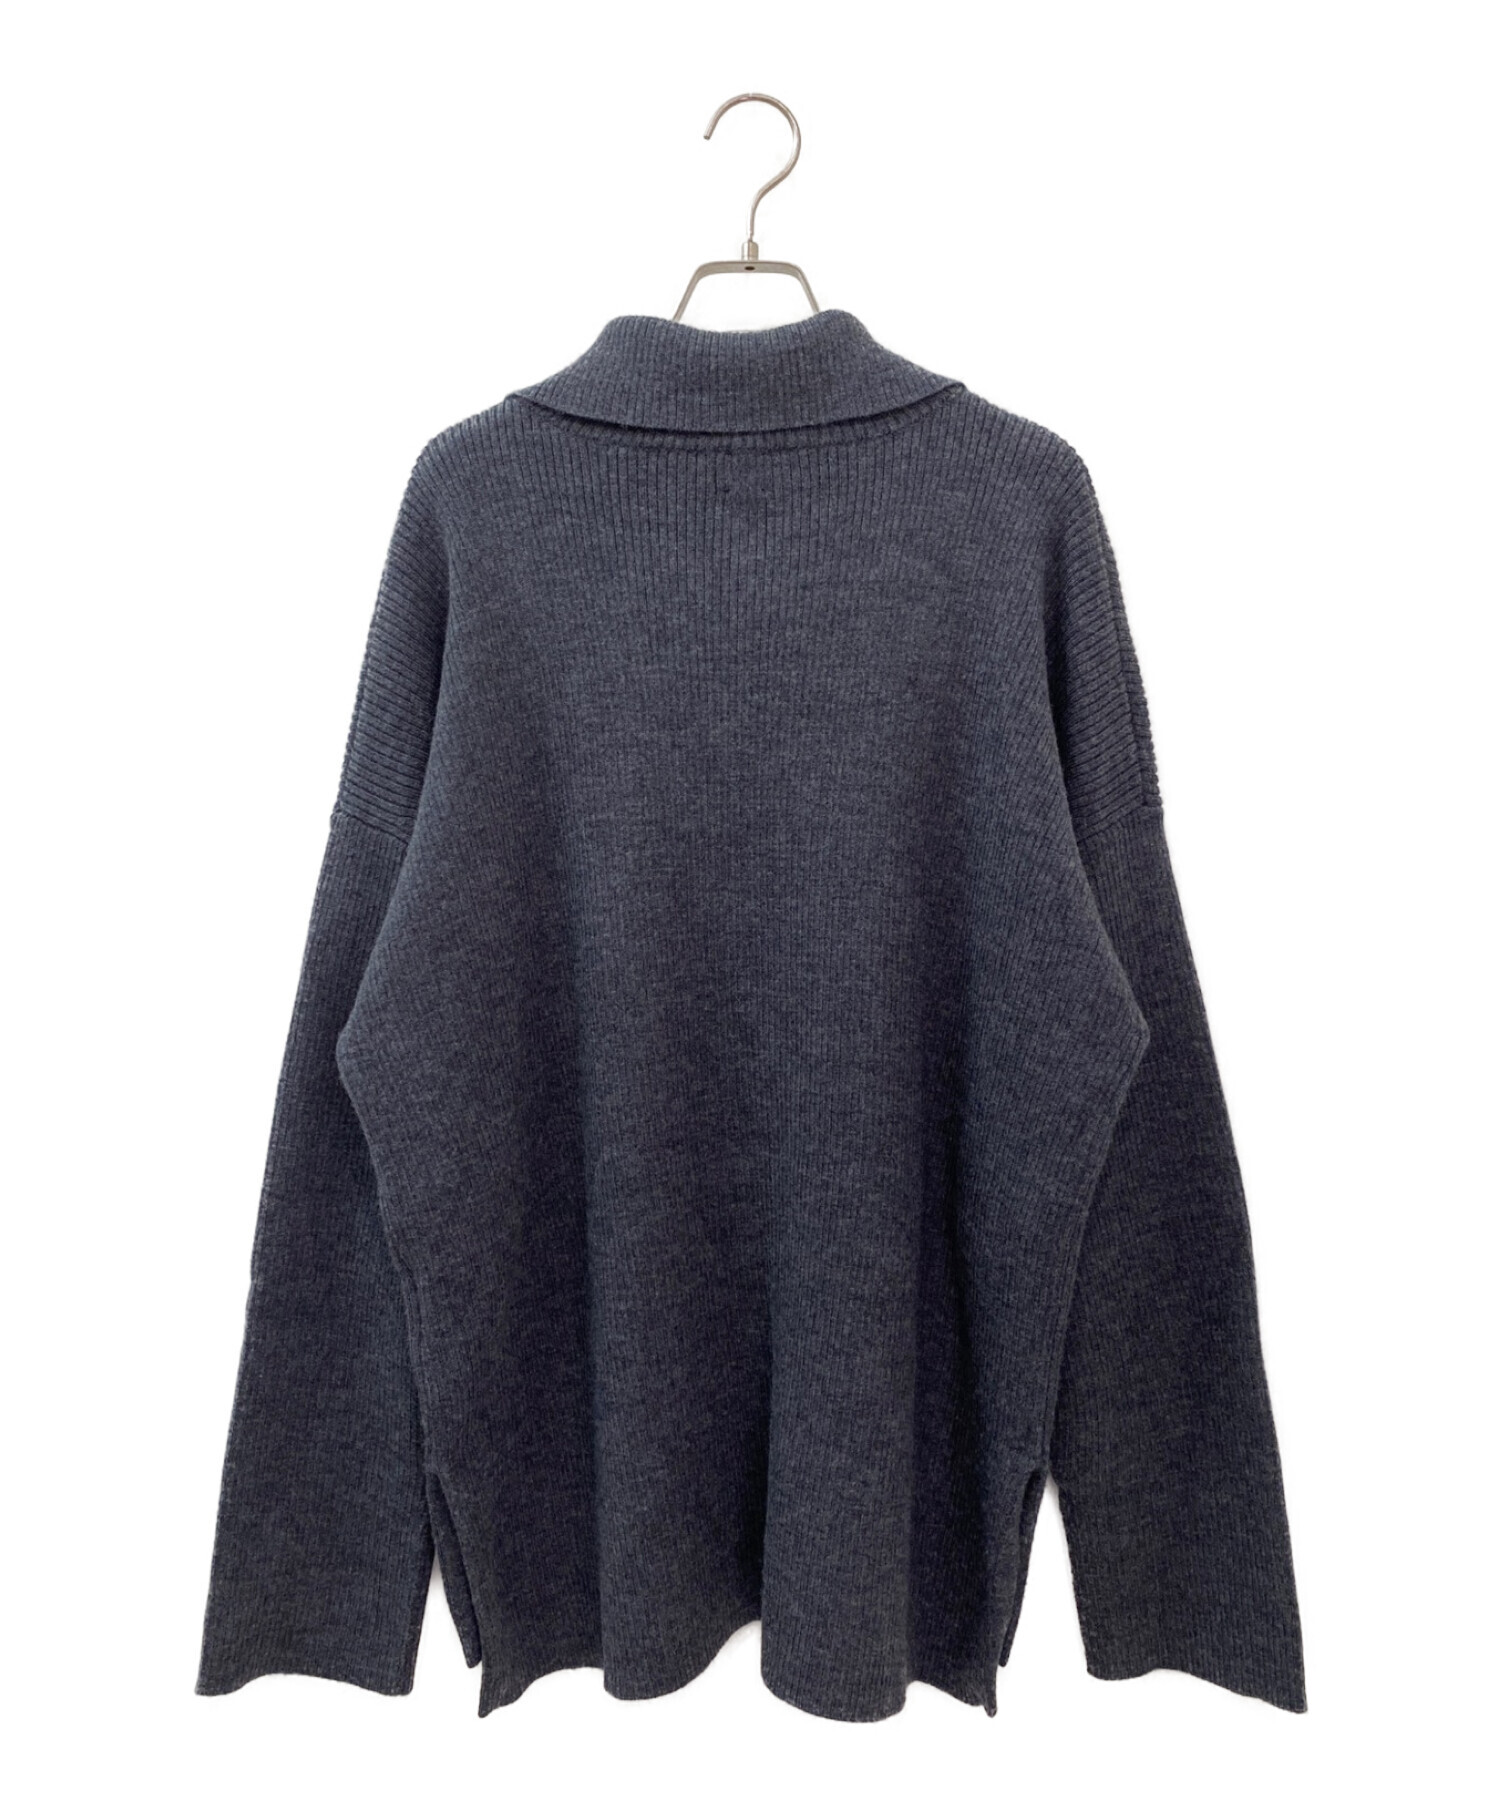 GOOD GRIEF!/グッドグリーフ】Knit Zipped Pullover